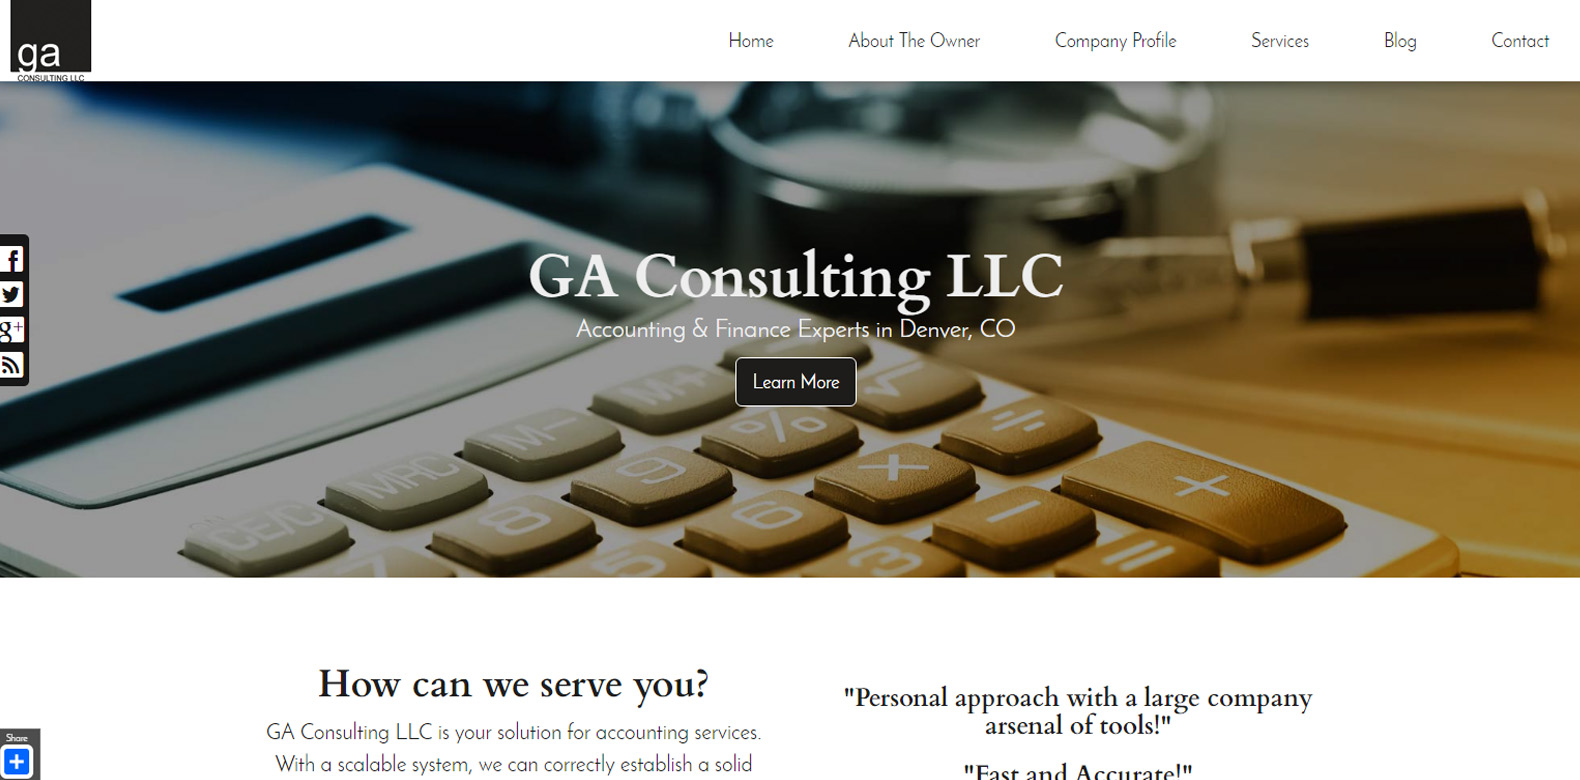 
New Website Launch: GA Consulting